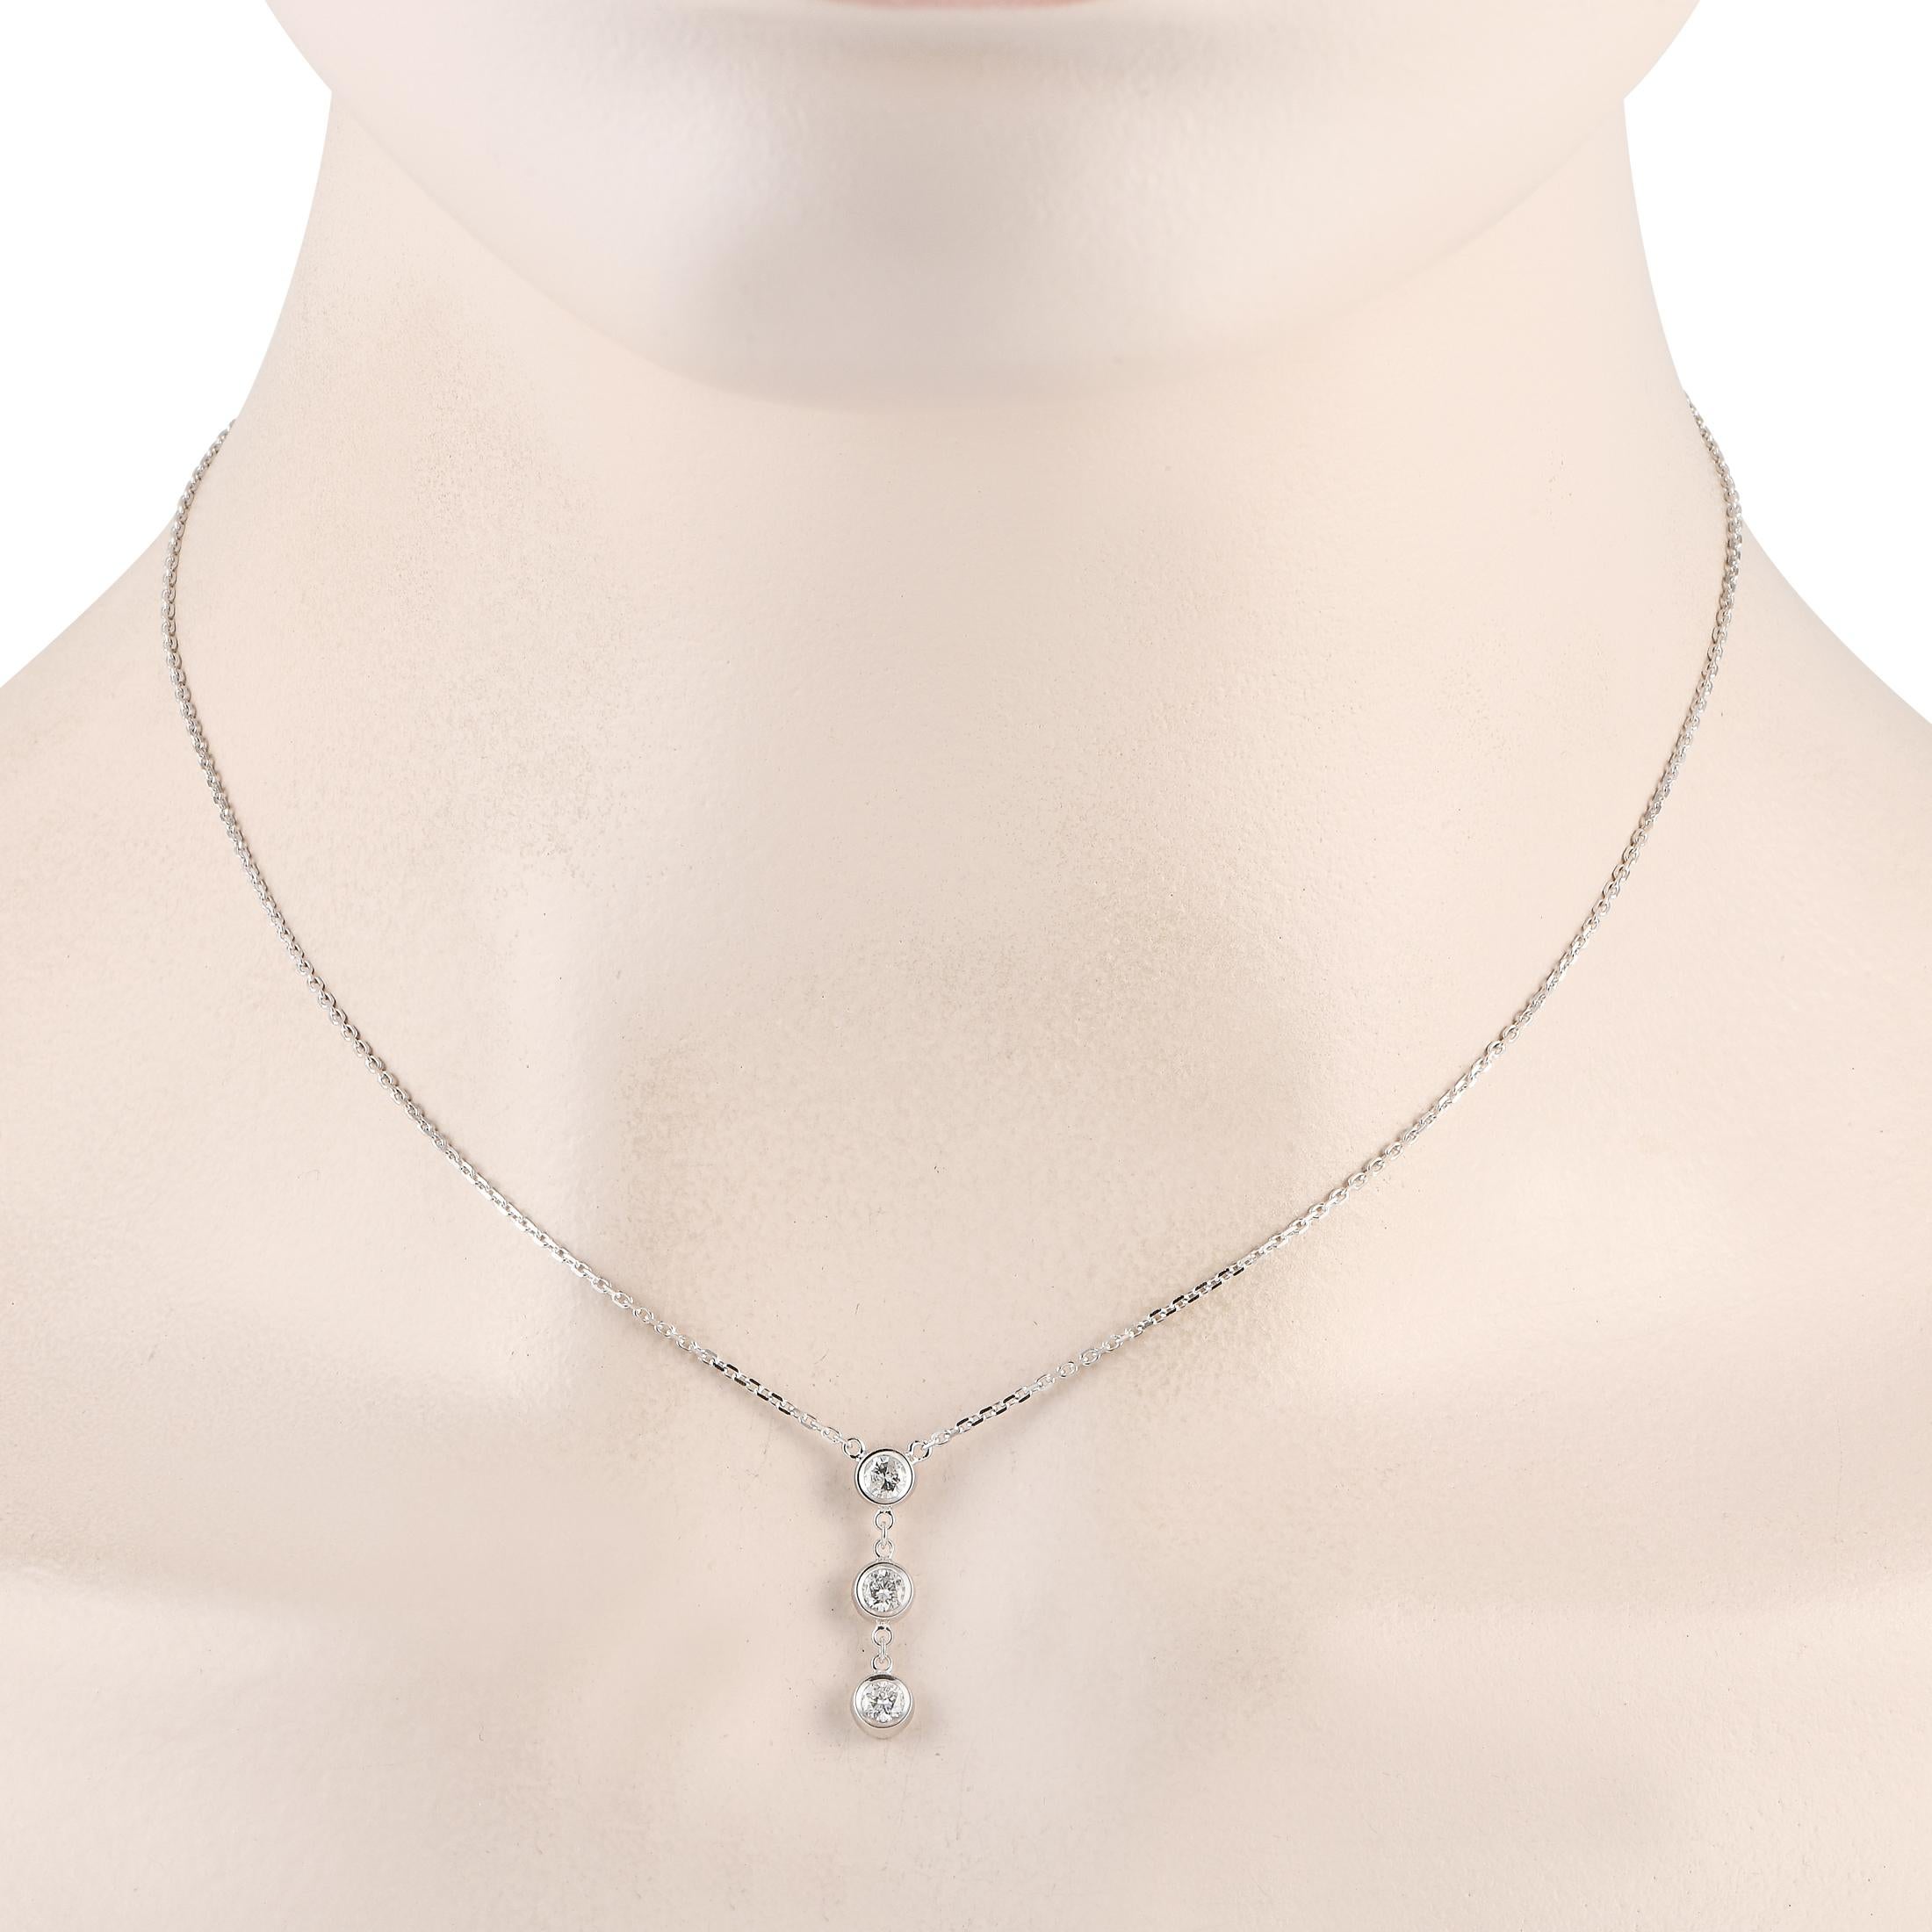 Make your everyday style sparkle with this three-stone diamond necklace. This 14K white gold necklace features a diamond trio pendant with three round bezel-set diamonds suspended vertically from a dainty chain. A lobster clasp secures the necklace